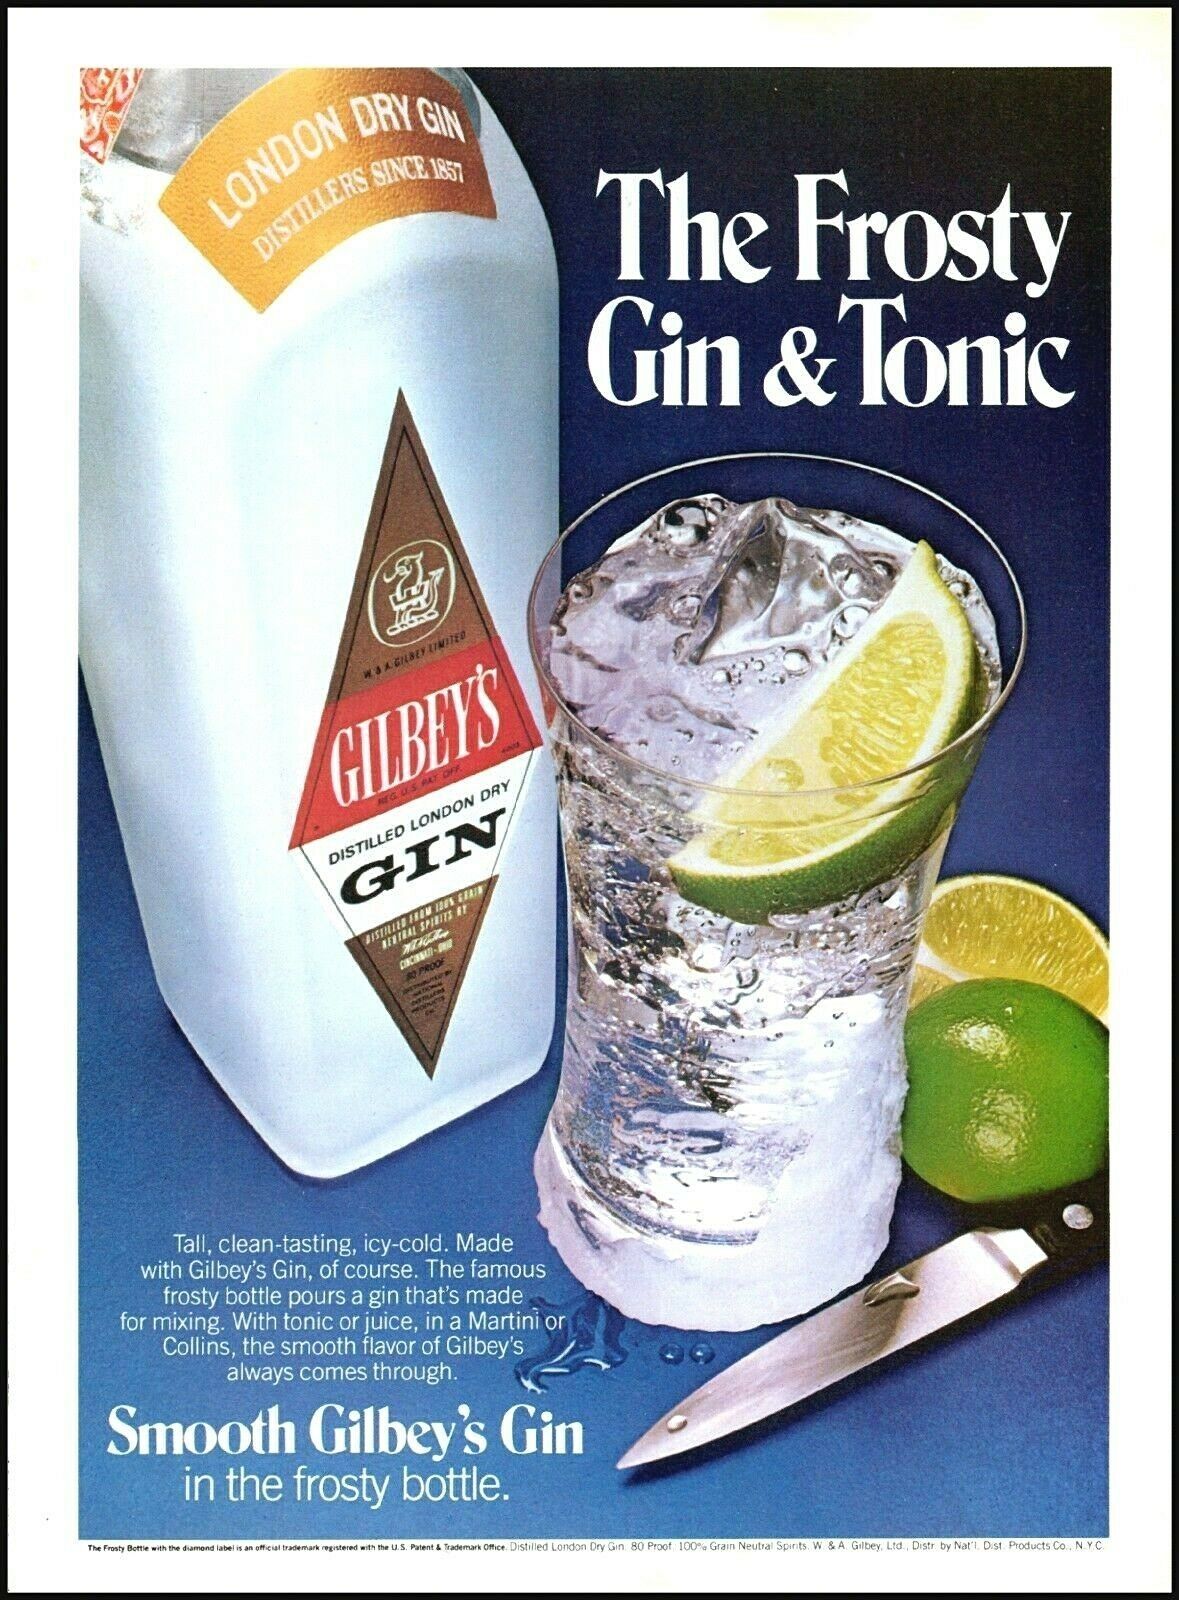 1980 Gilbey's Gin Frosty Gin & Tonic Bottle Lime Vintage Photo Print Ad Ads28